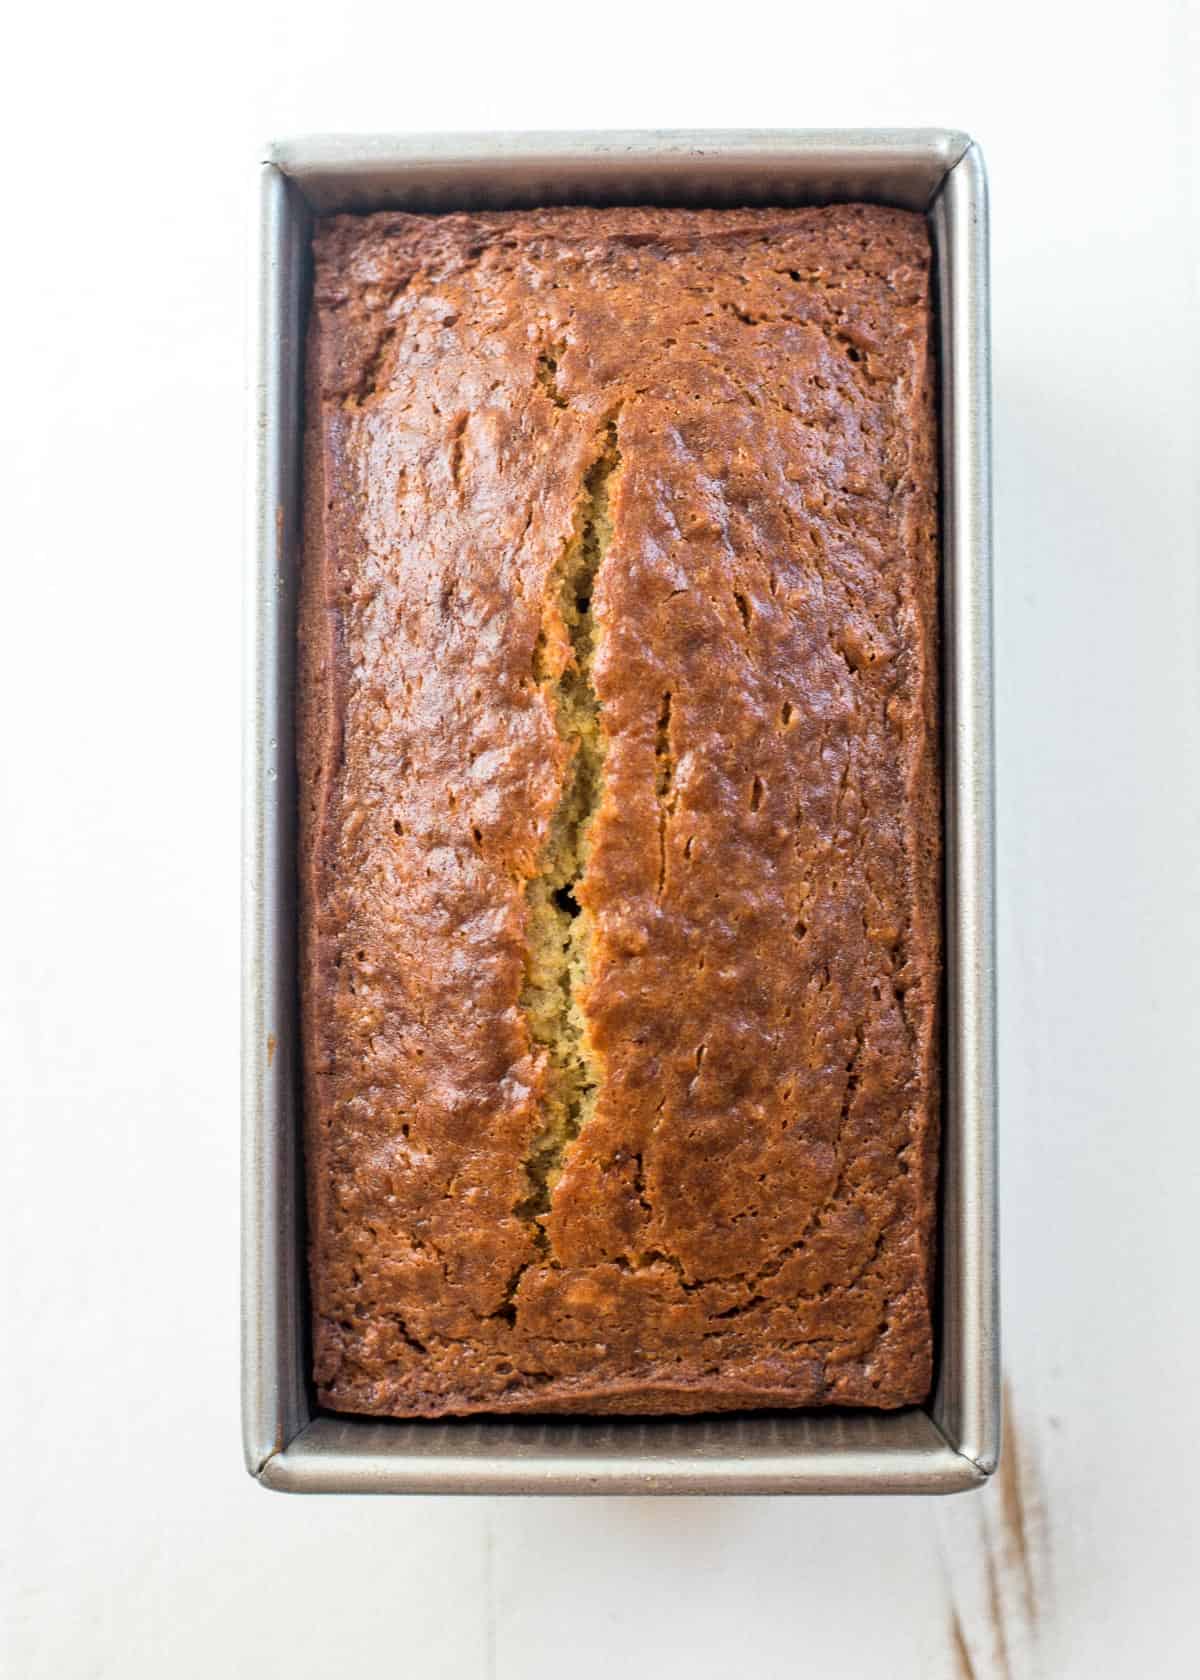 easy banana bread in a loaf pan